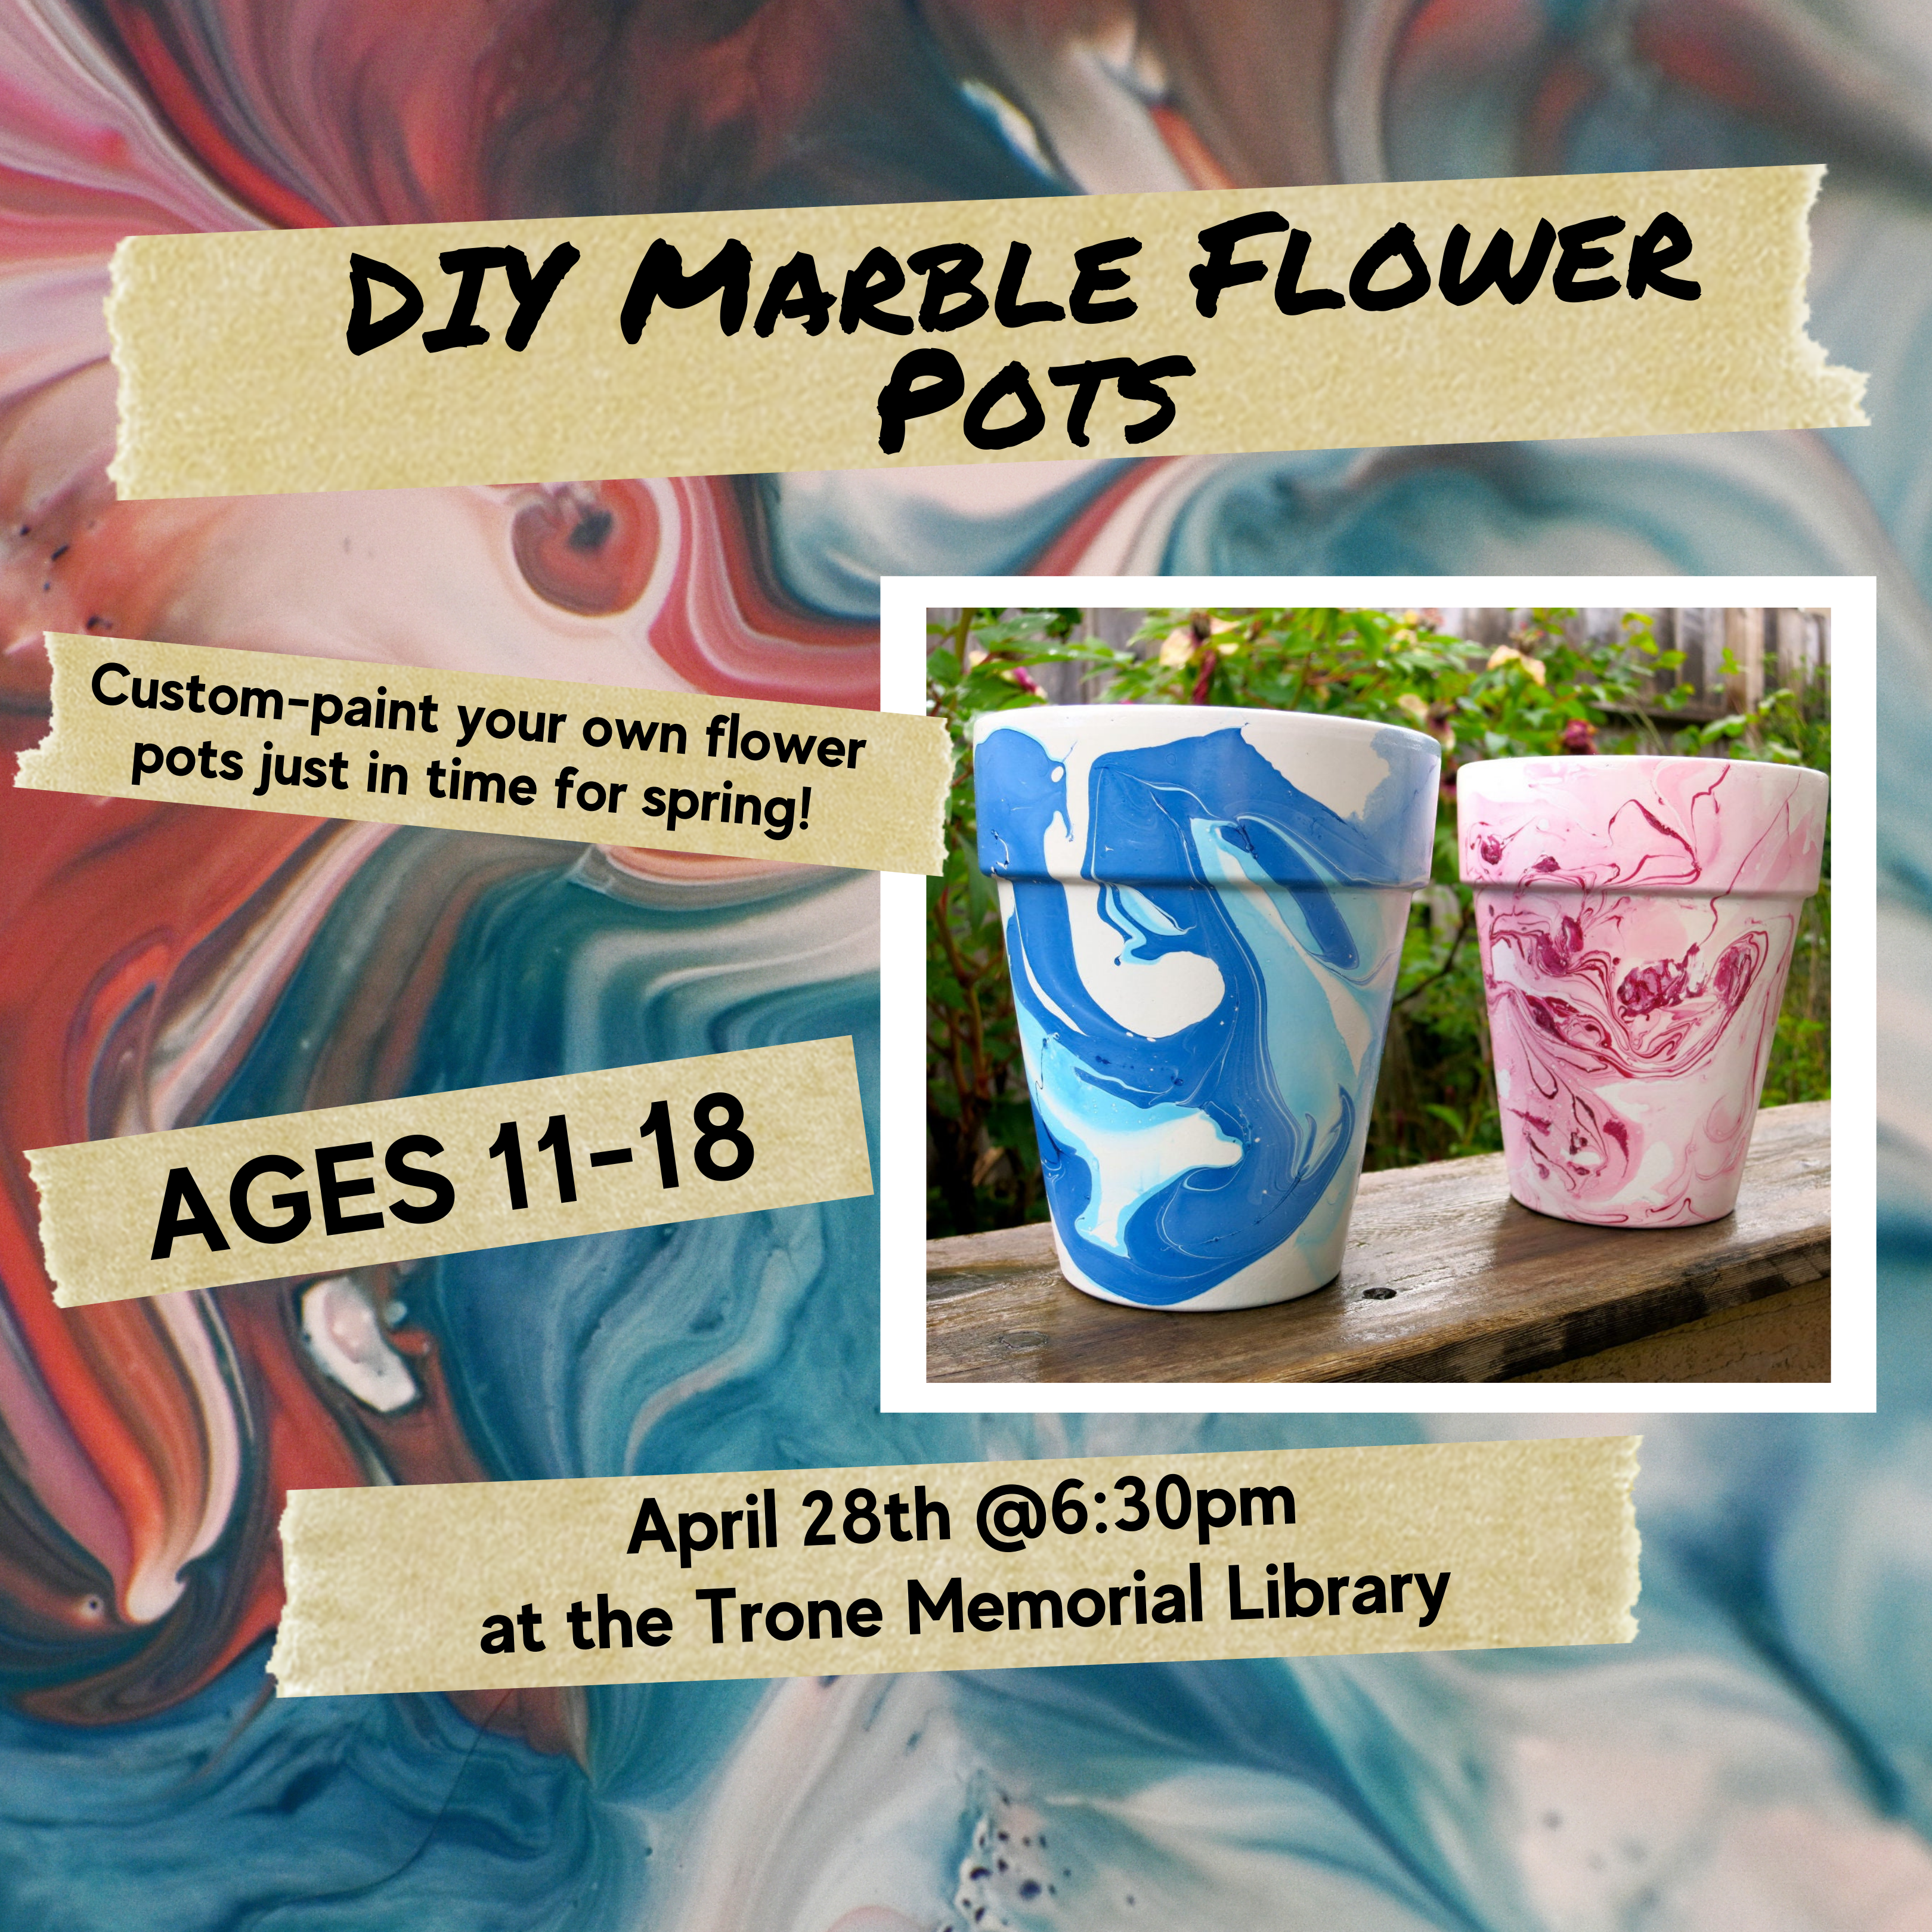 An image of two colorful marbled flower pots and text reading: DIY MARBLE FLOWER POTS. CUSTOM PAINT YOUR OWN FLOWER POTS JUST IN TIME FOR SPRING. AGES 11-18. APRIL 28TH @6:30PM AT THE TRONE MEMORIAL LIBRARY.